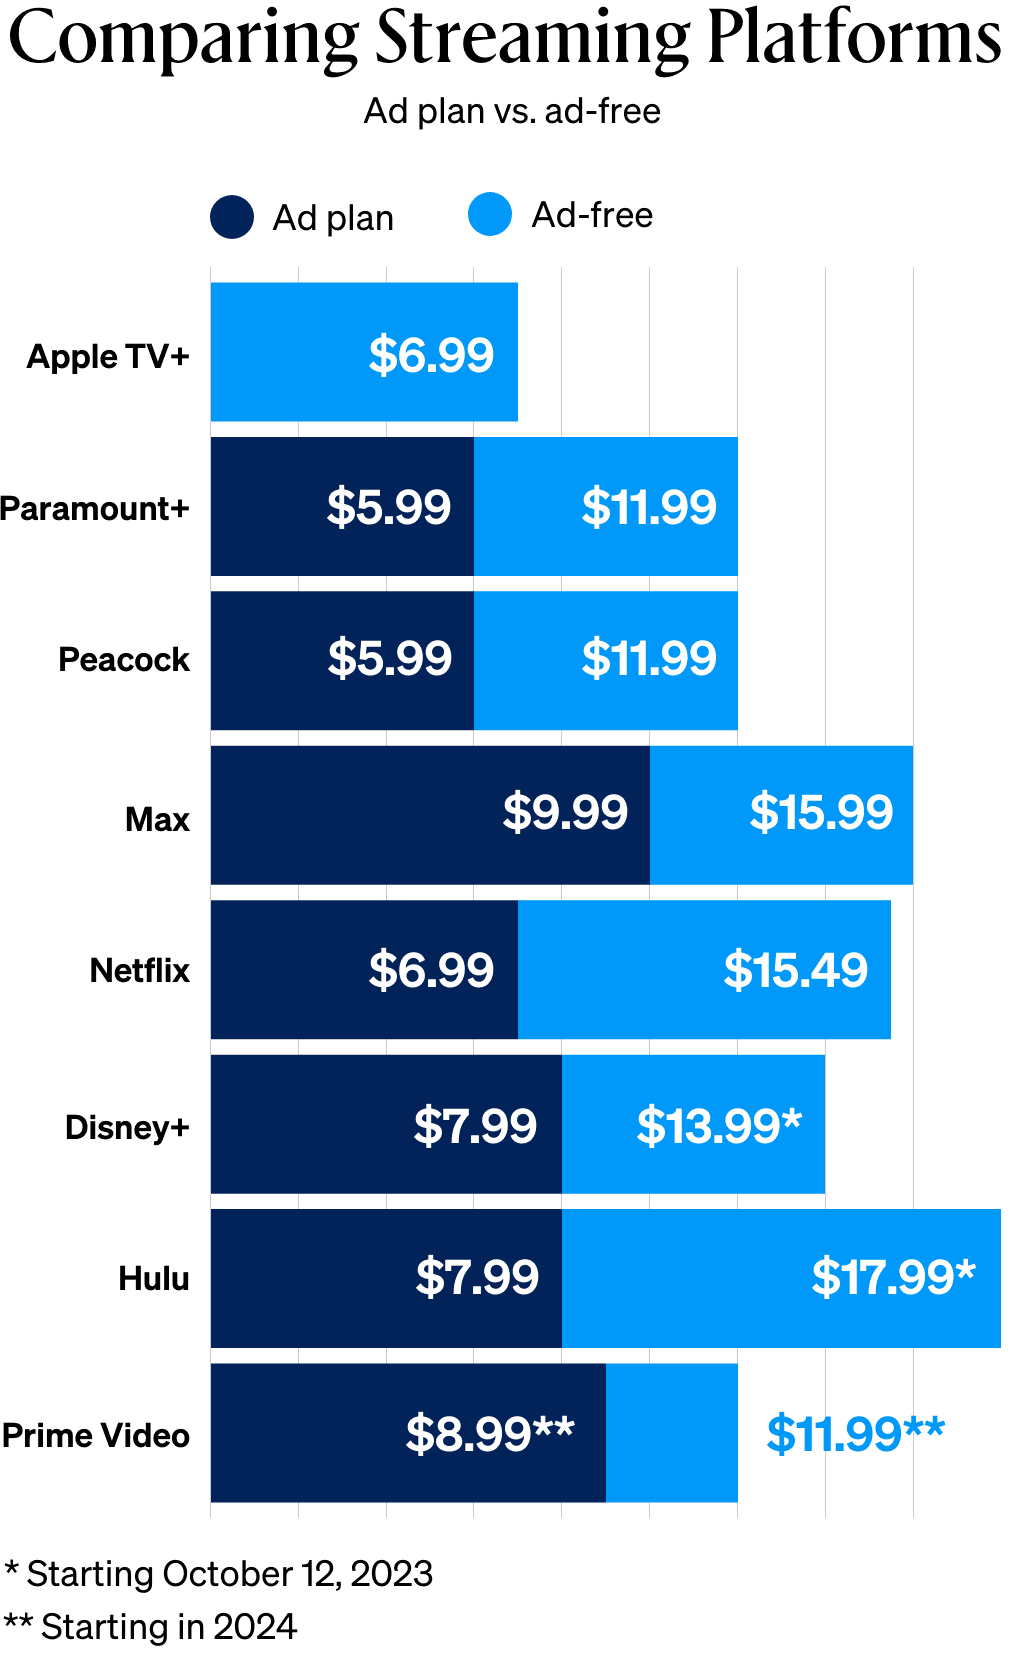 Bar chart comparing the cost of streaming platforms ad plans versus their ad-free plans. Includes pricing for Apple TV+, Paramount+, Peacock, Max, Netflix, Disney+, Hulu, and Prime Video.